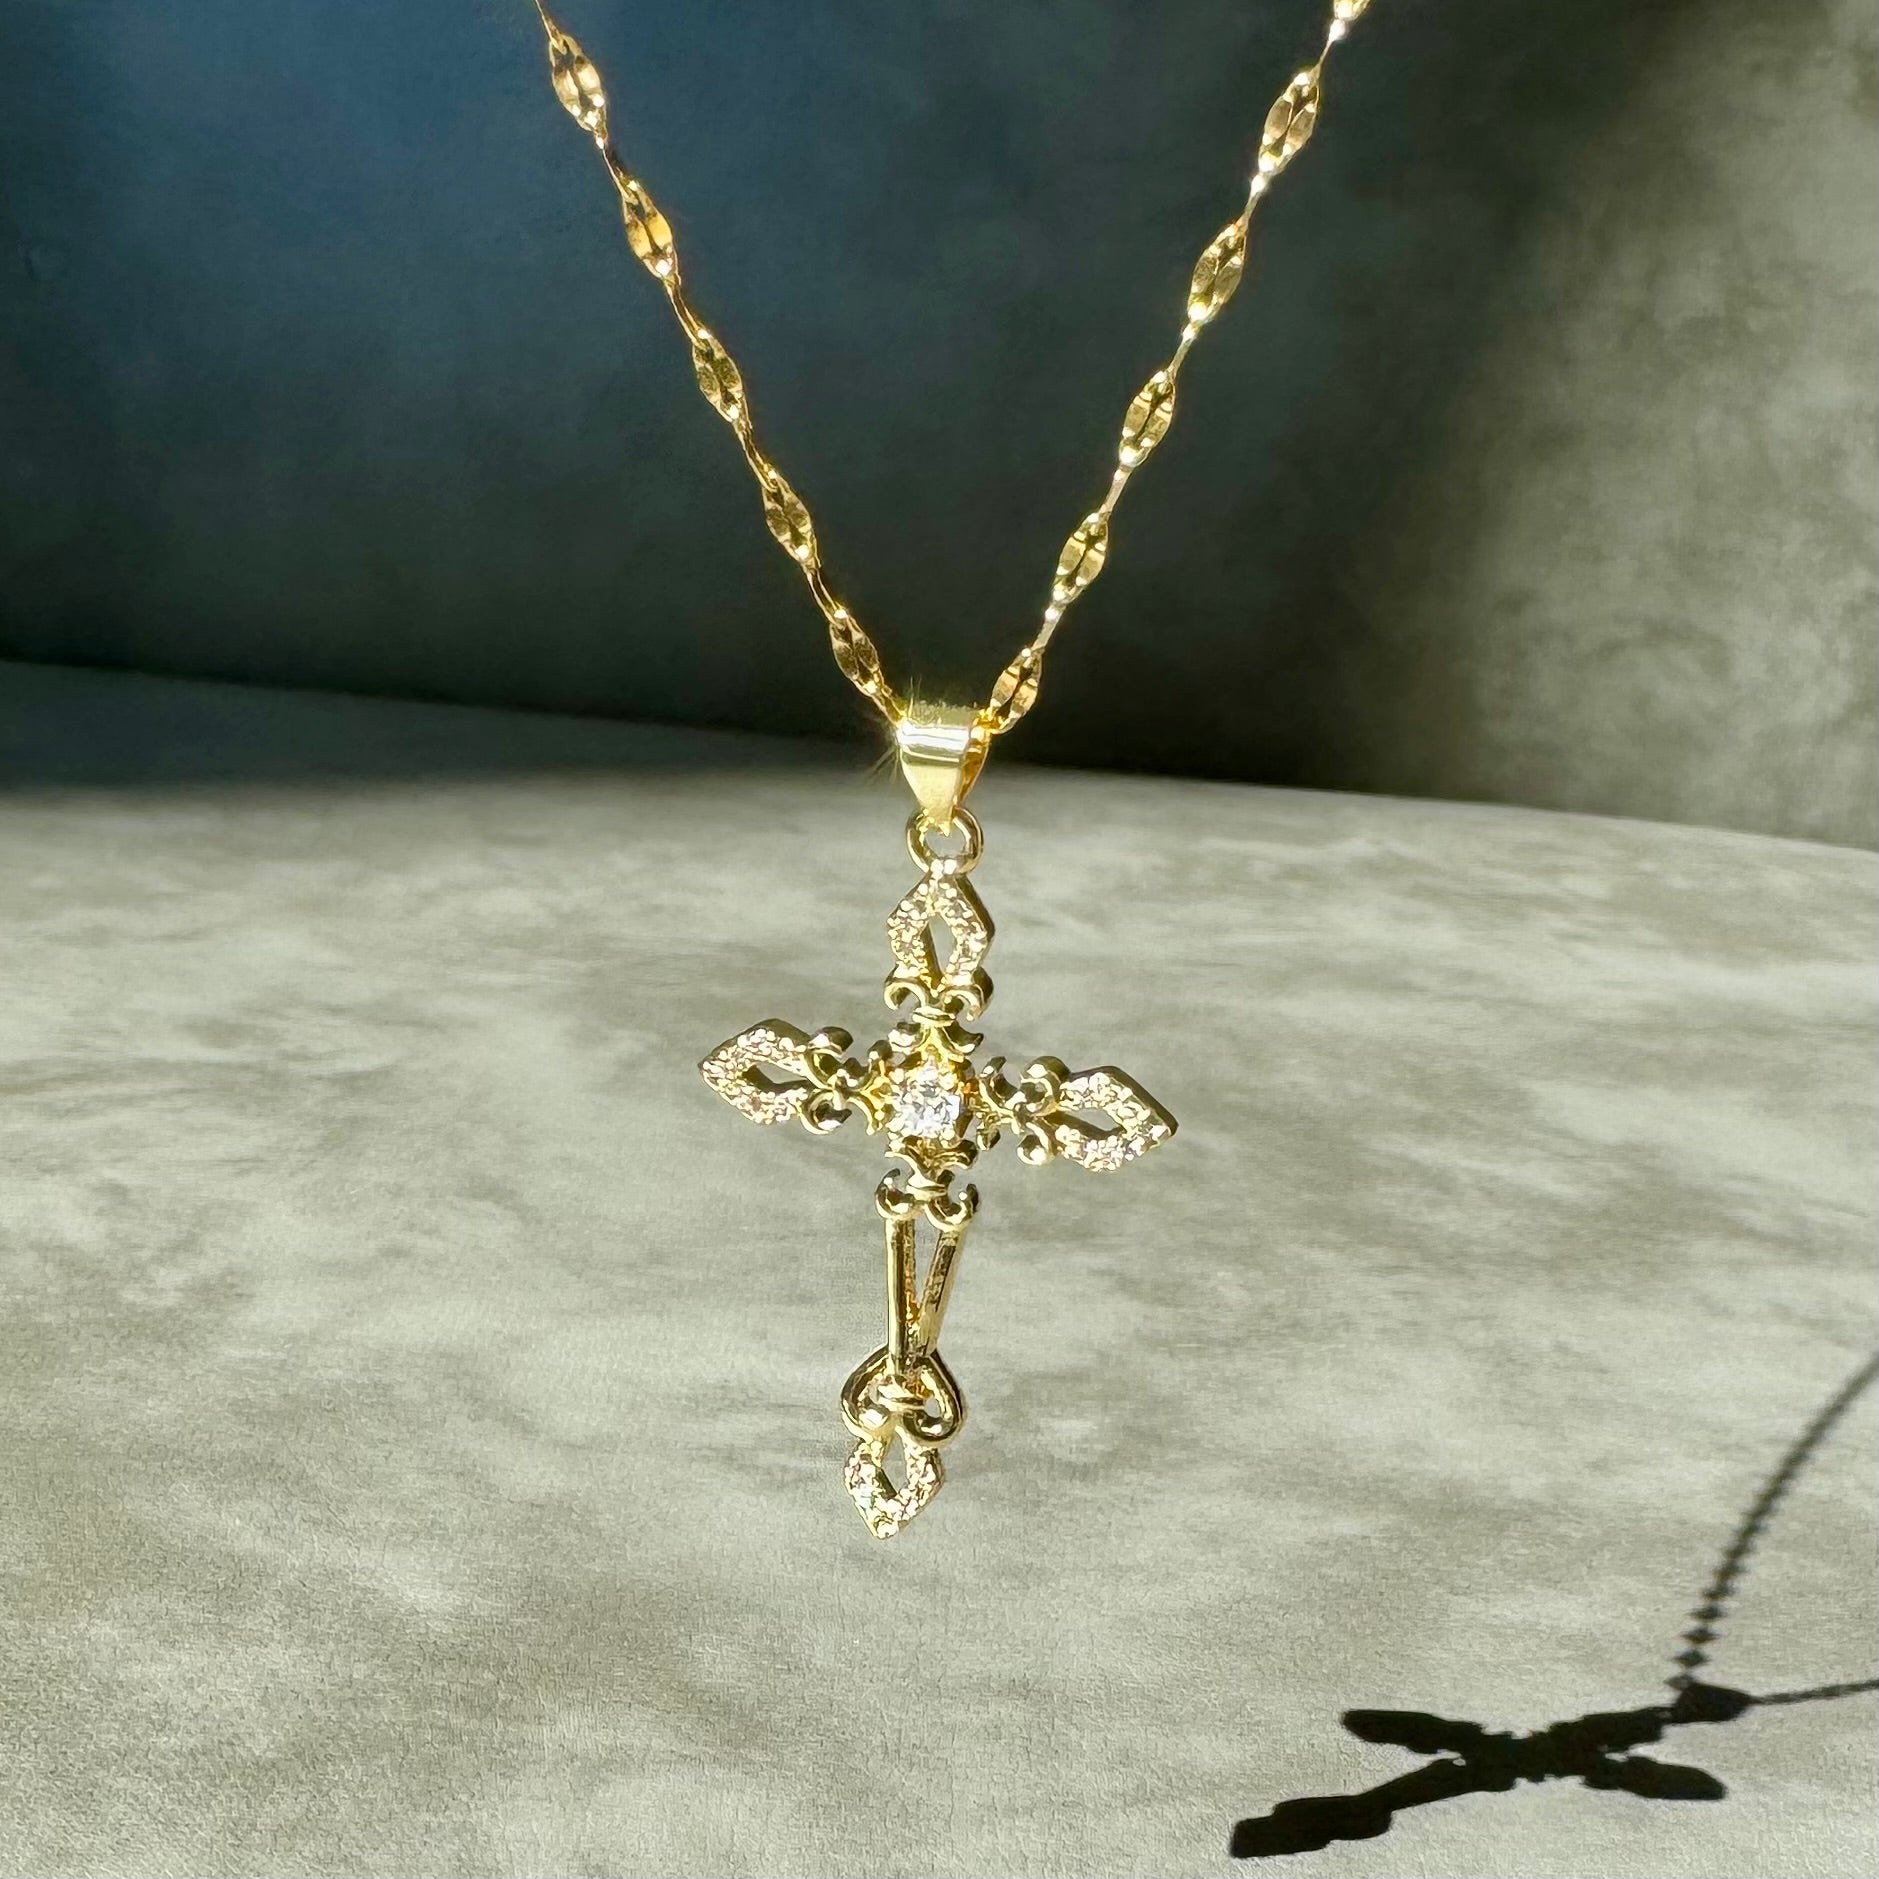 Buy the Gold Ornate Crystal Religious Cross Necklace | JaeBee Jewelry